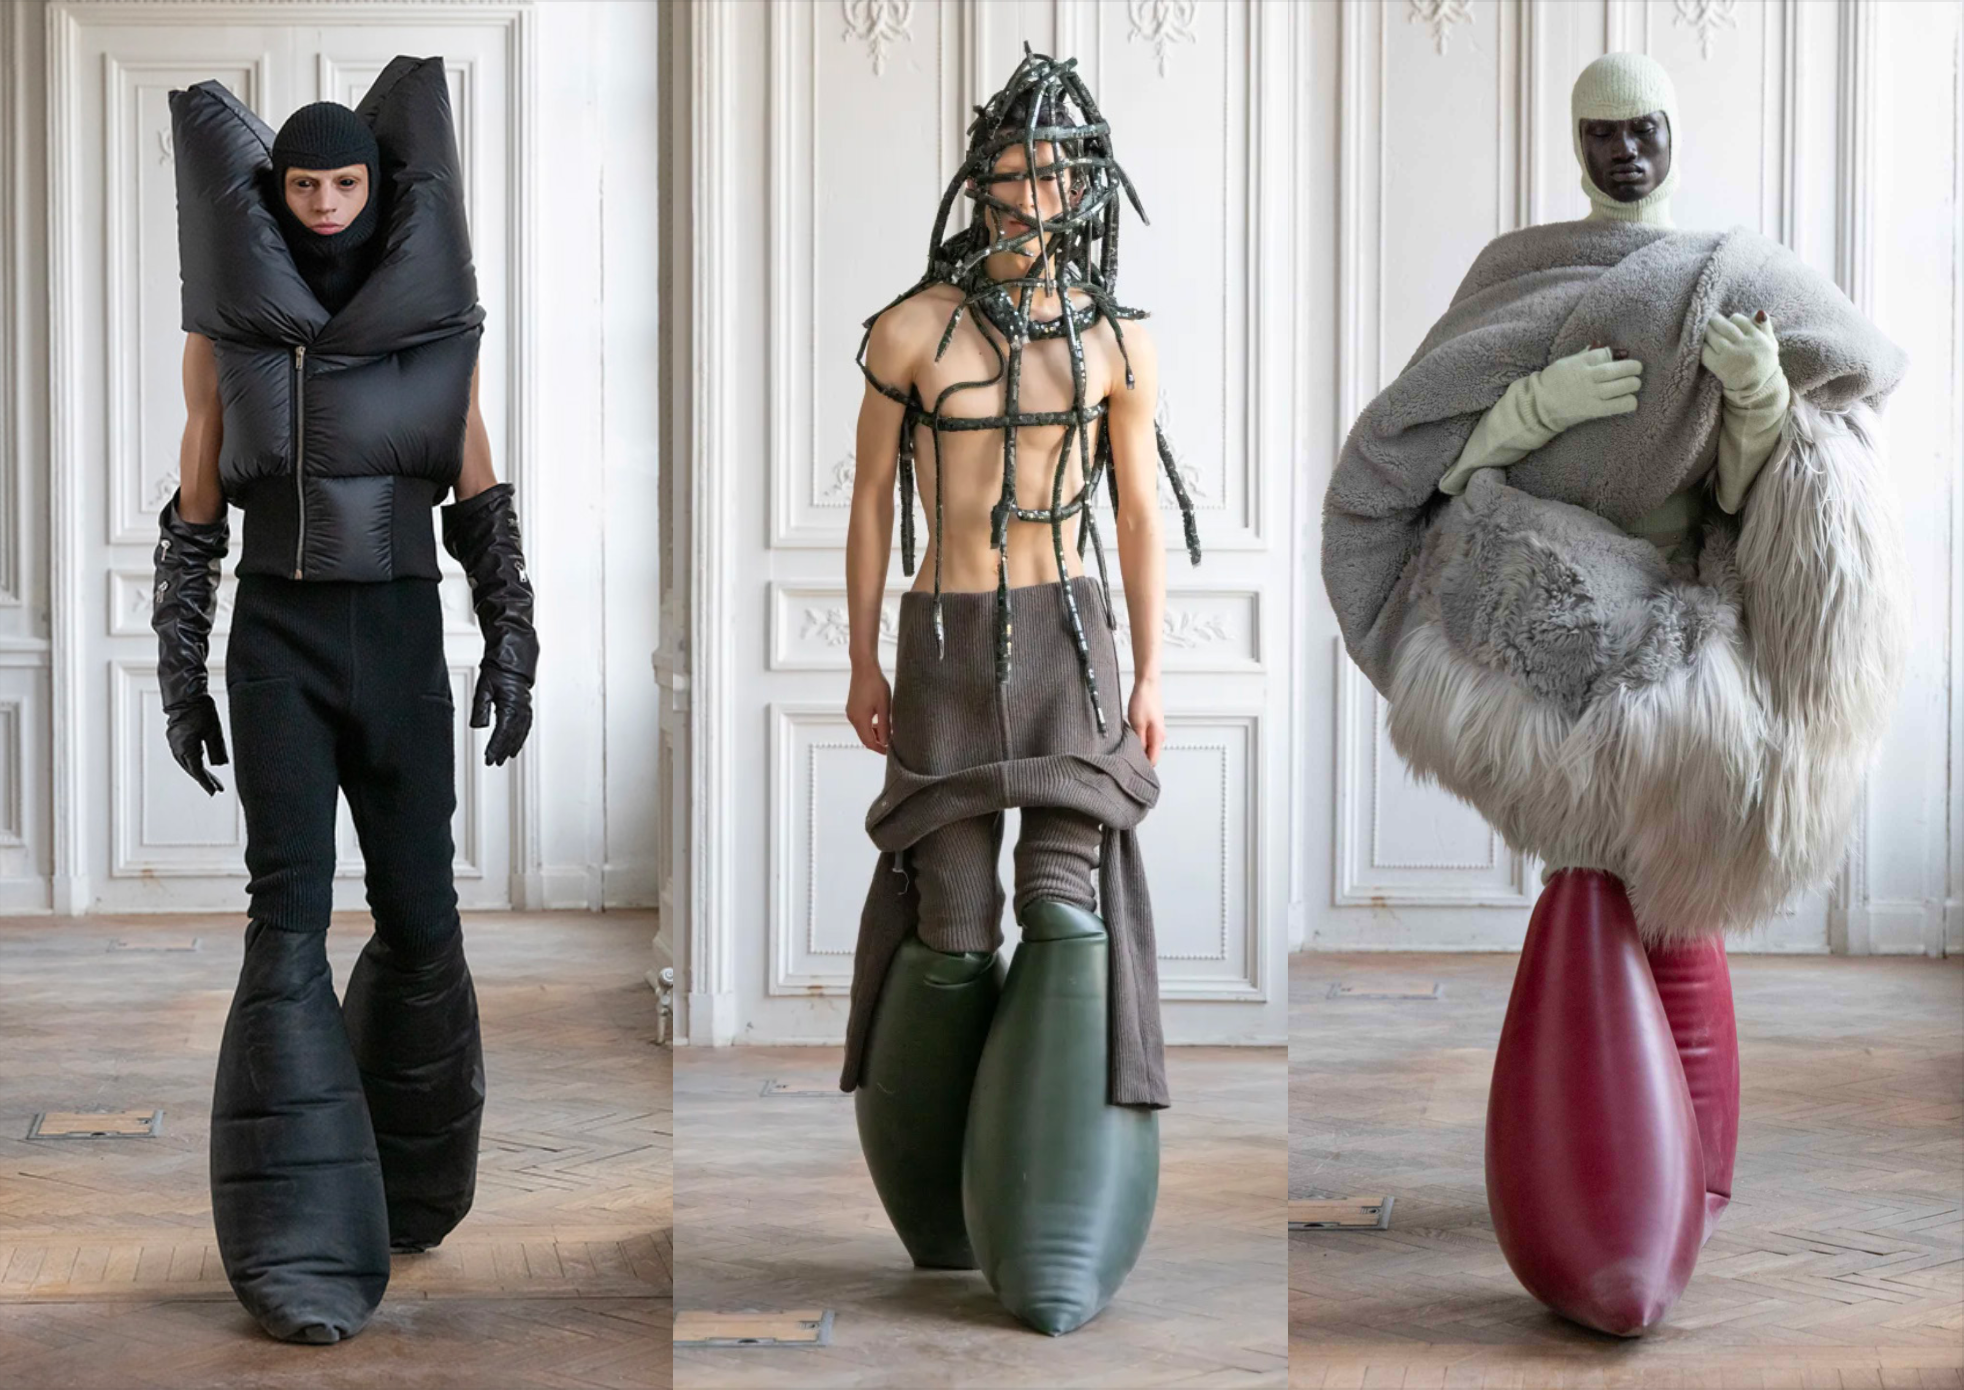 Rick Owens used recycled materials to convey the dichotomy between utopian visions and the grotesque. Photo: FootwearNews.com